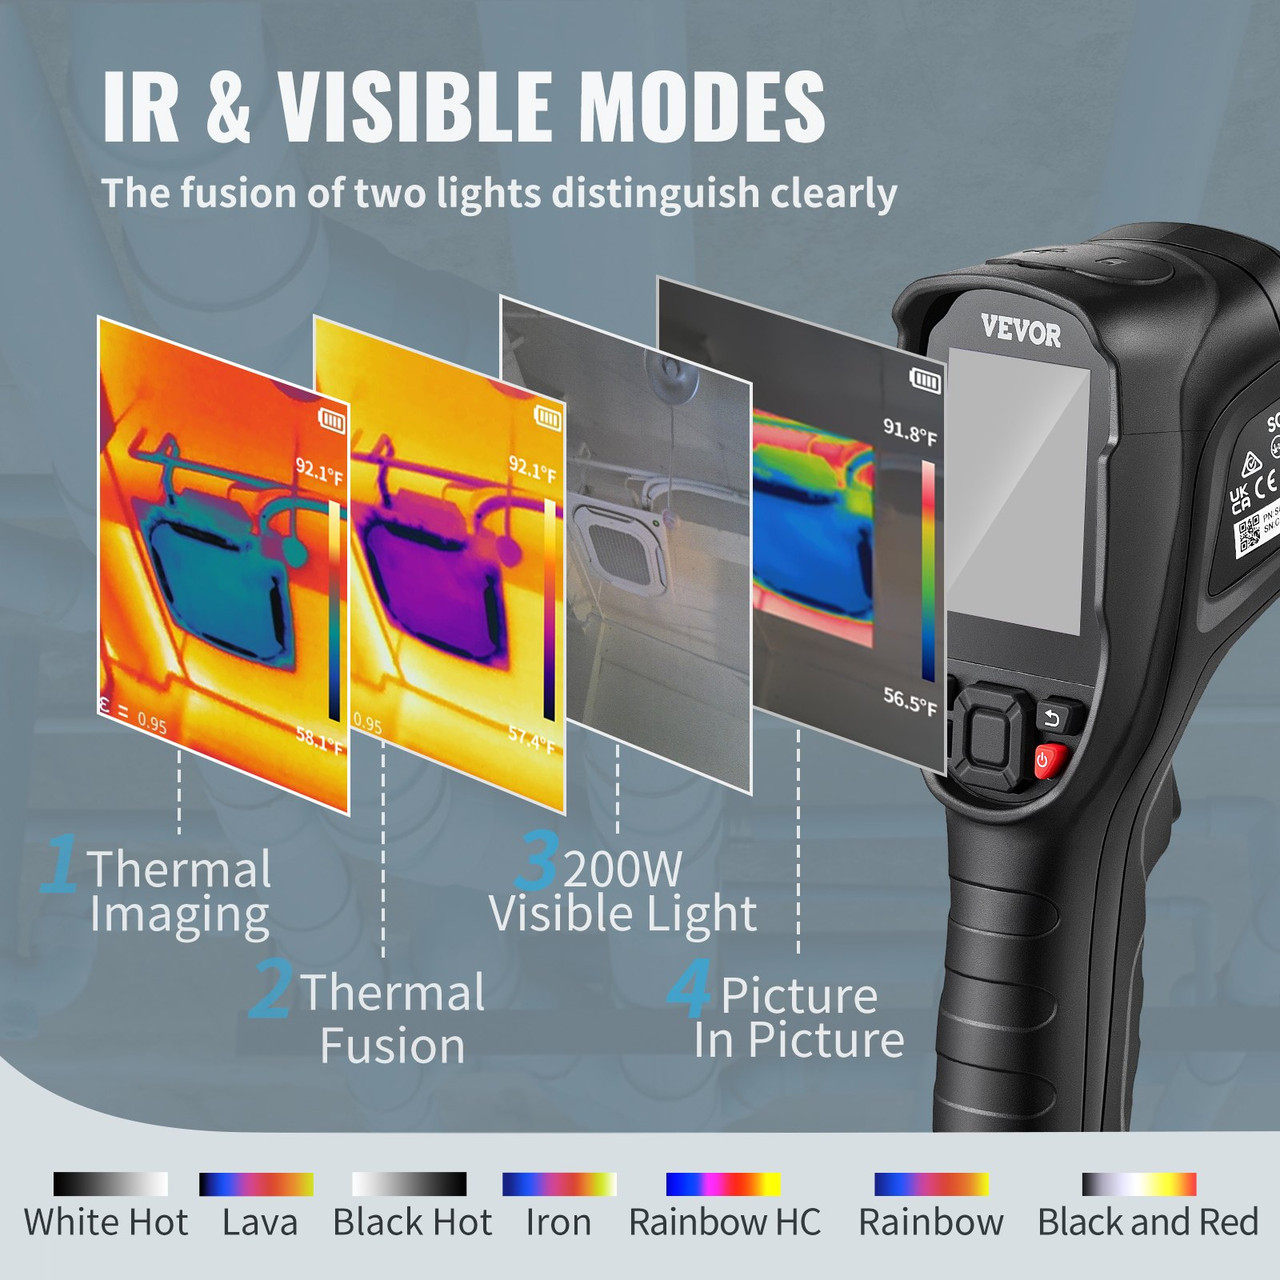 Infrared Thermal Imager Visible Light Camera 2MP IR Resolution 240x180